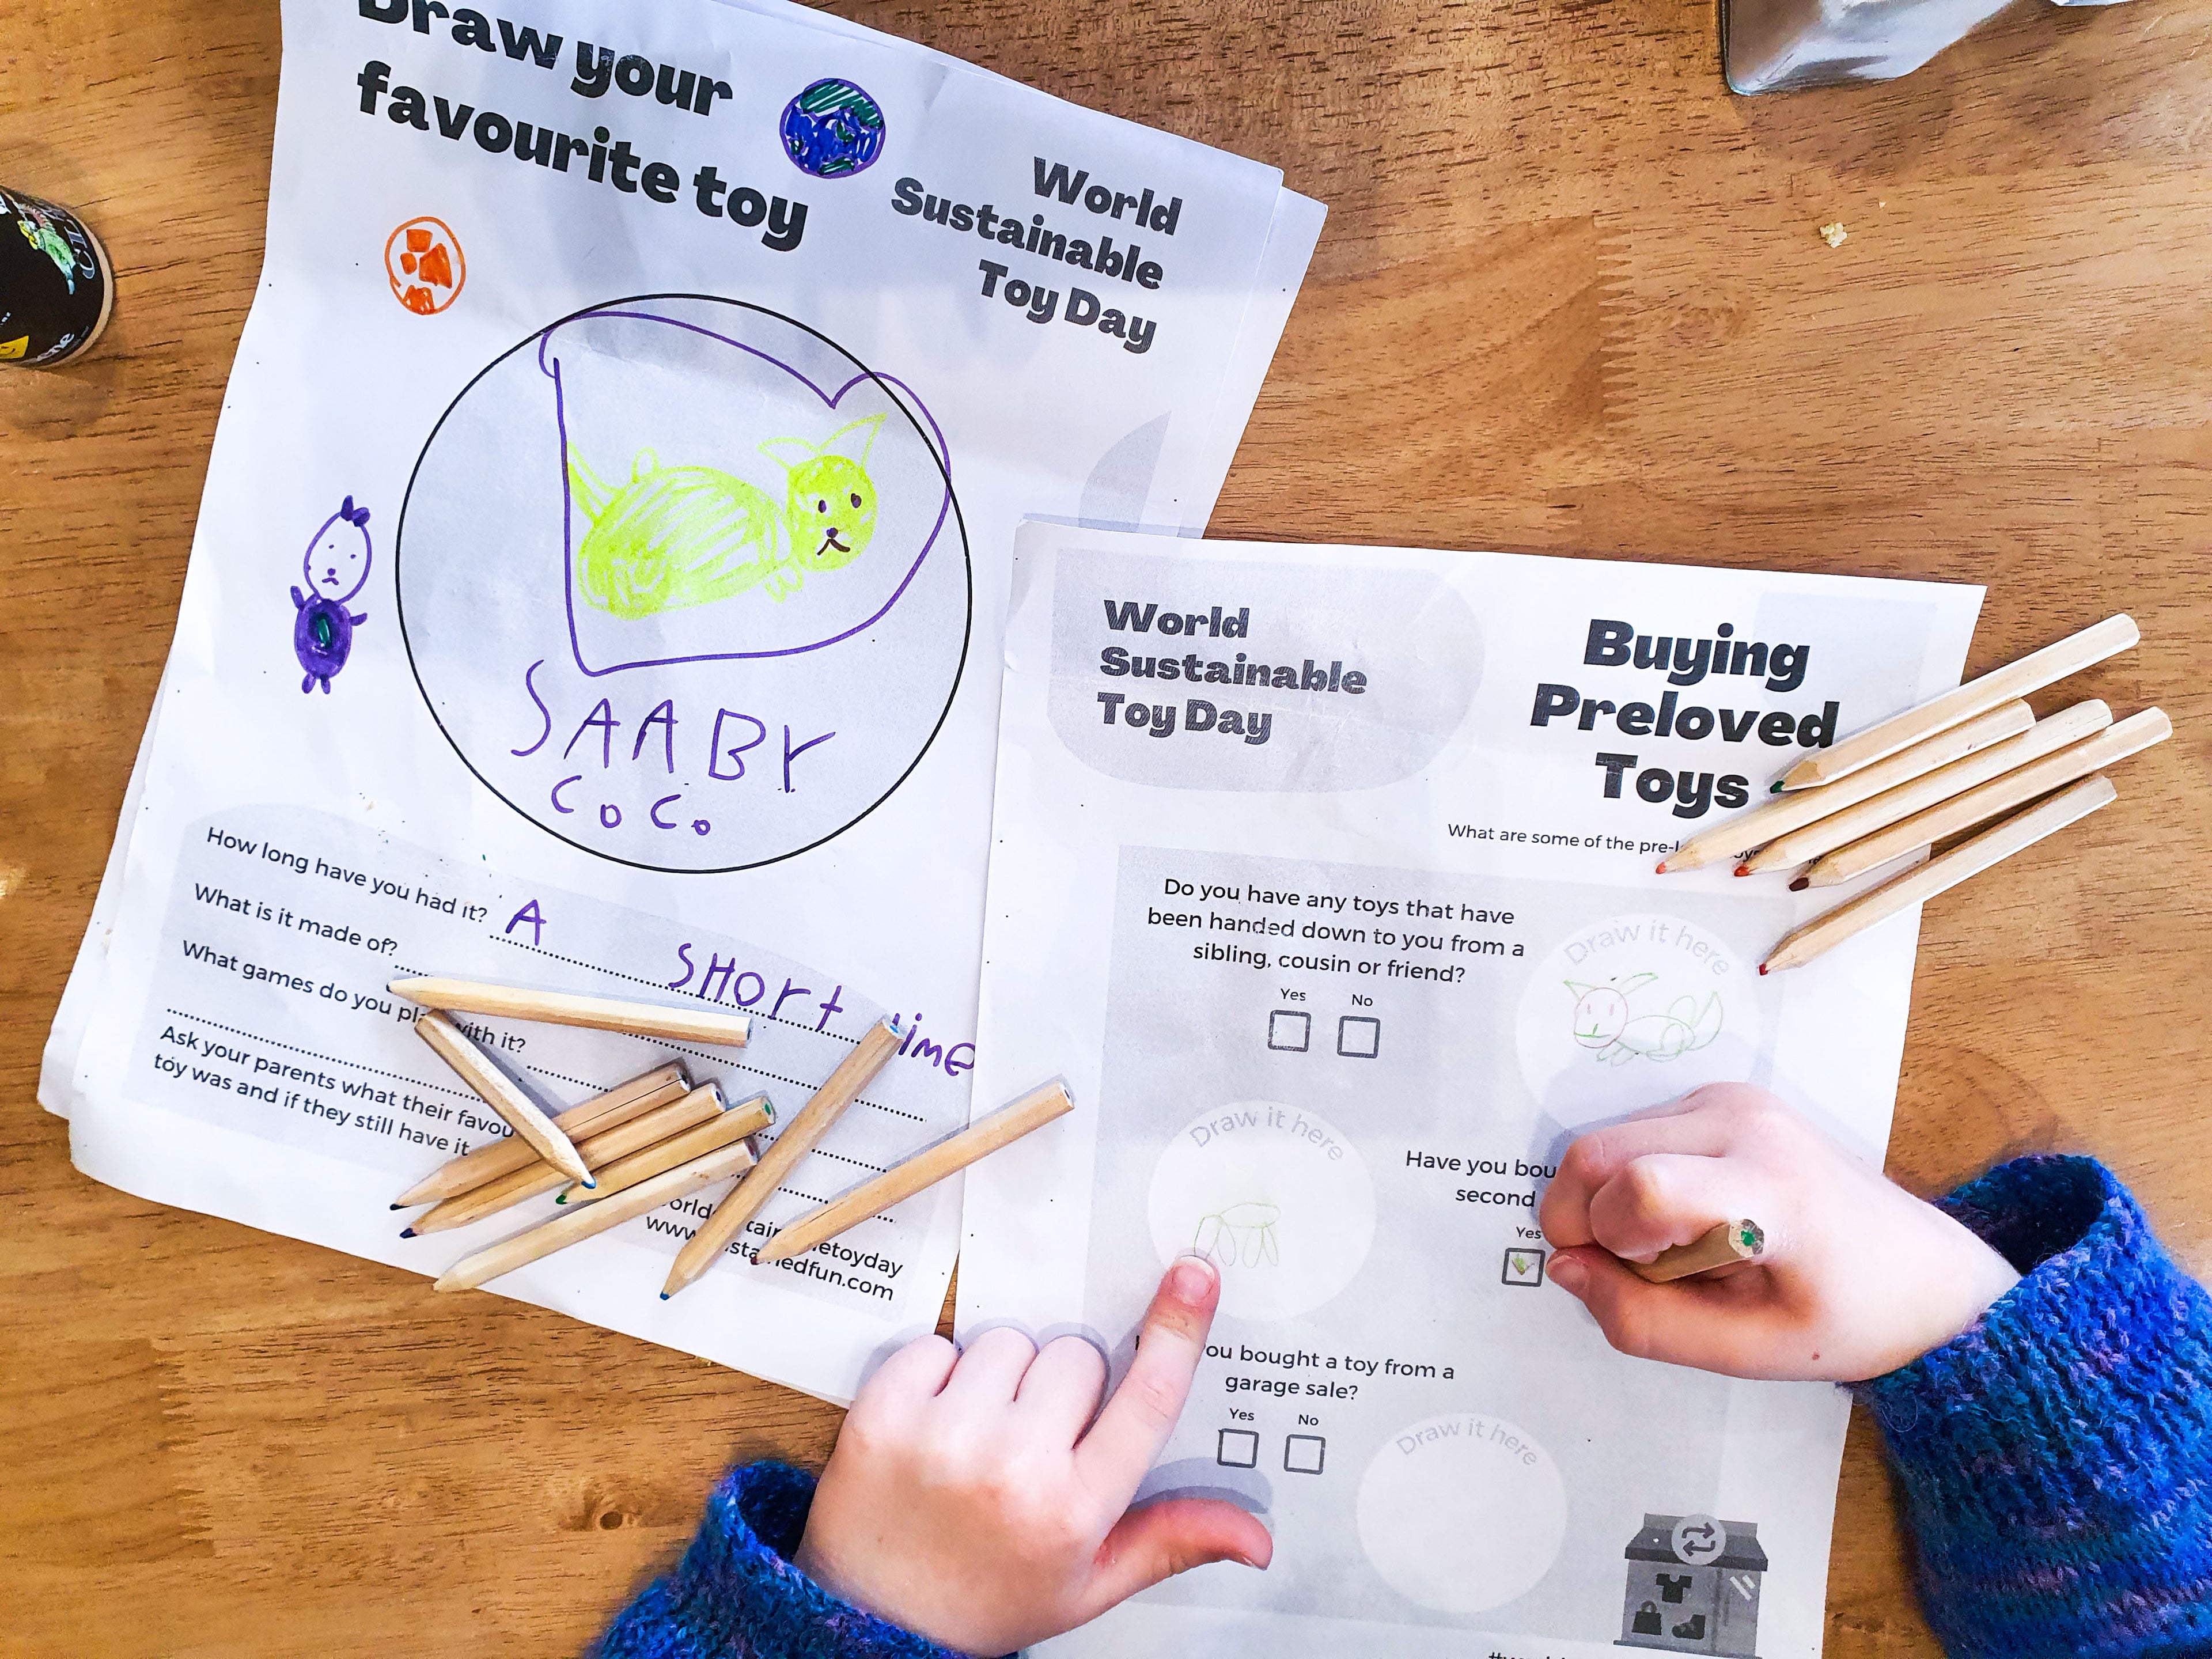 A bird's-eye view of activity sheets with coloured pencils and a young girl's hands. The young girl is completed one of the activity sheets. The sheets say: 'Draw your favourite toy, World Sustainable Toy Day' and 'Buying pre-loved toys. World Sustainable Toy Day'.